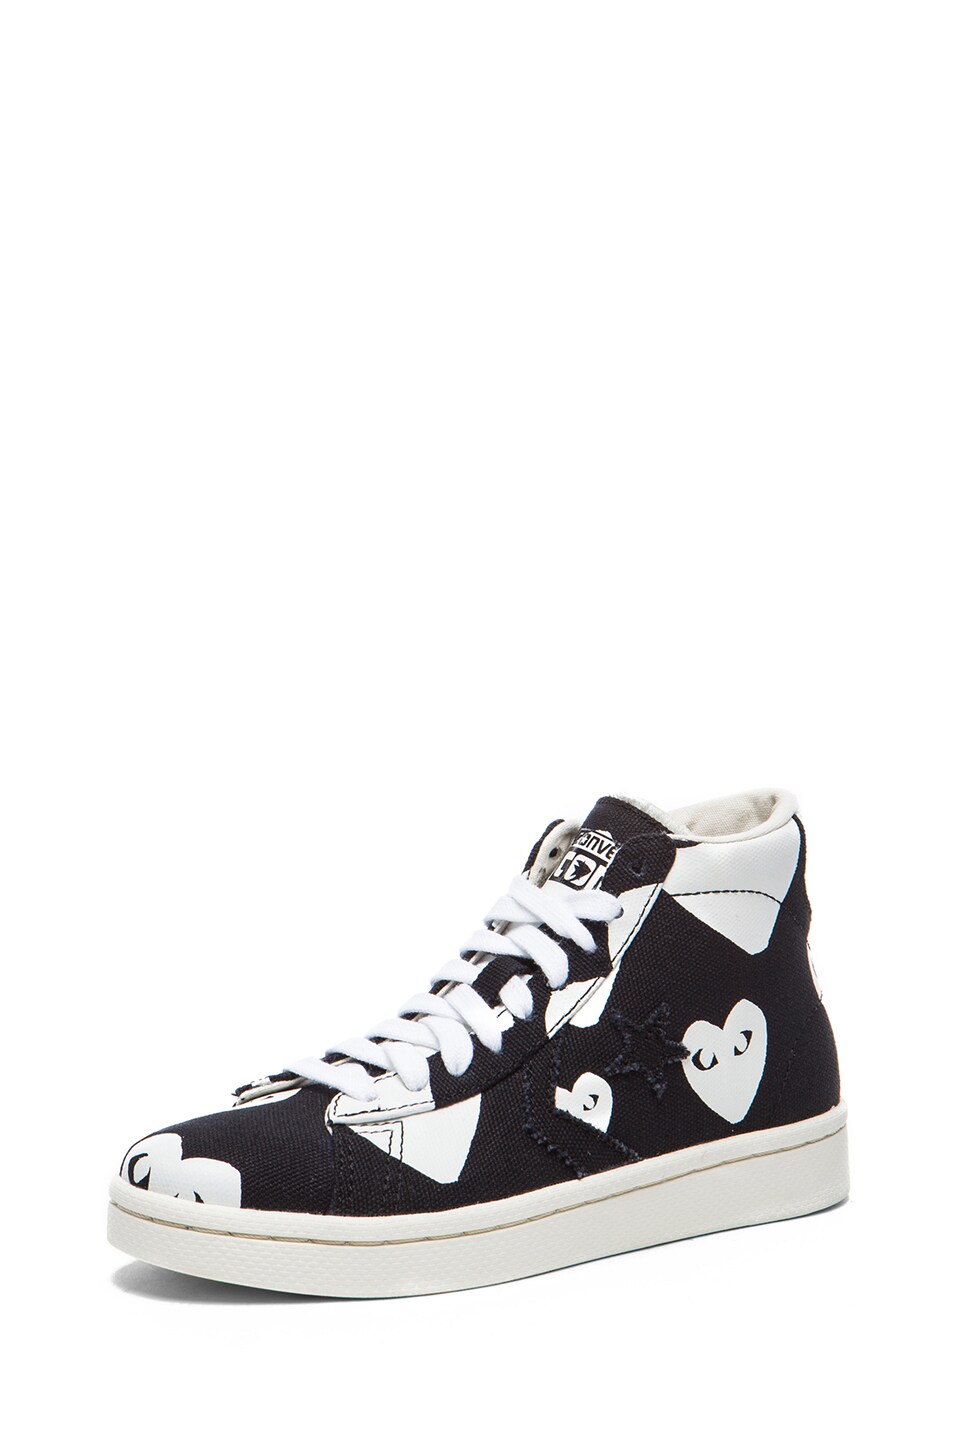 Comme Des Garcons PLAY High Top Canvas Sneakers in Black & White | FWRD